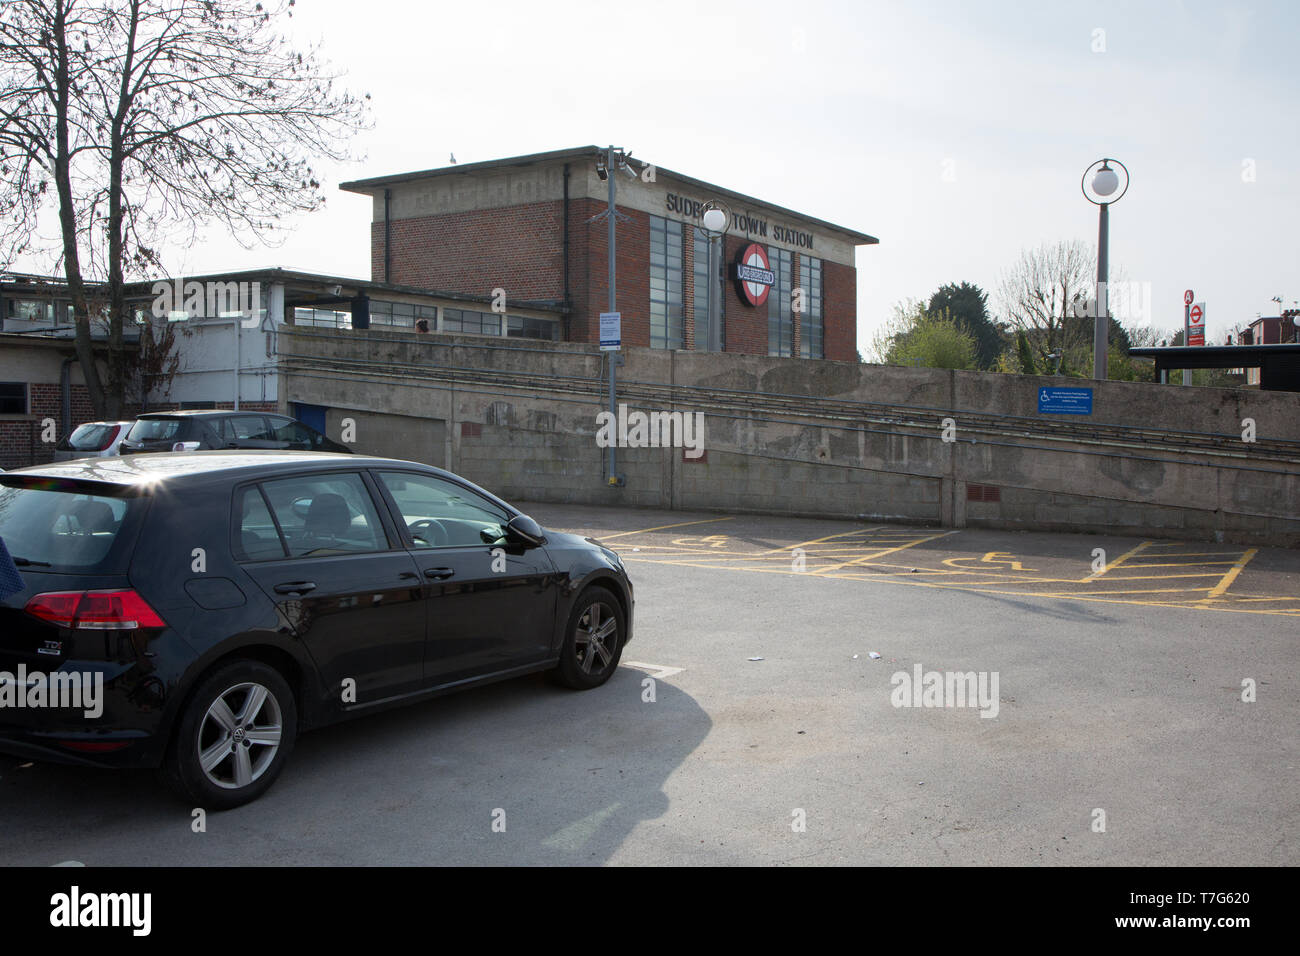 Ramp at Sudbury Town Station, which gives access for disabled people. Space for disabled parking is also visible on the carpark. Stock Photo